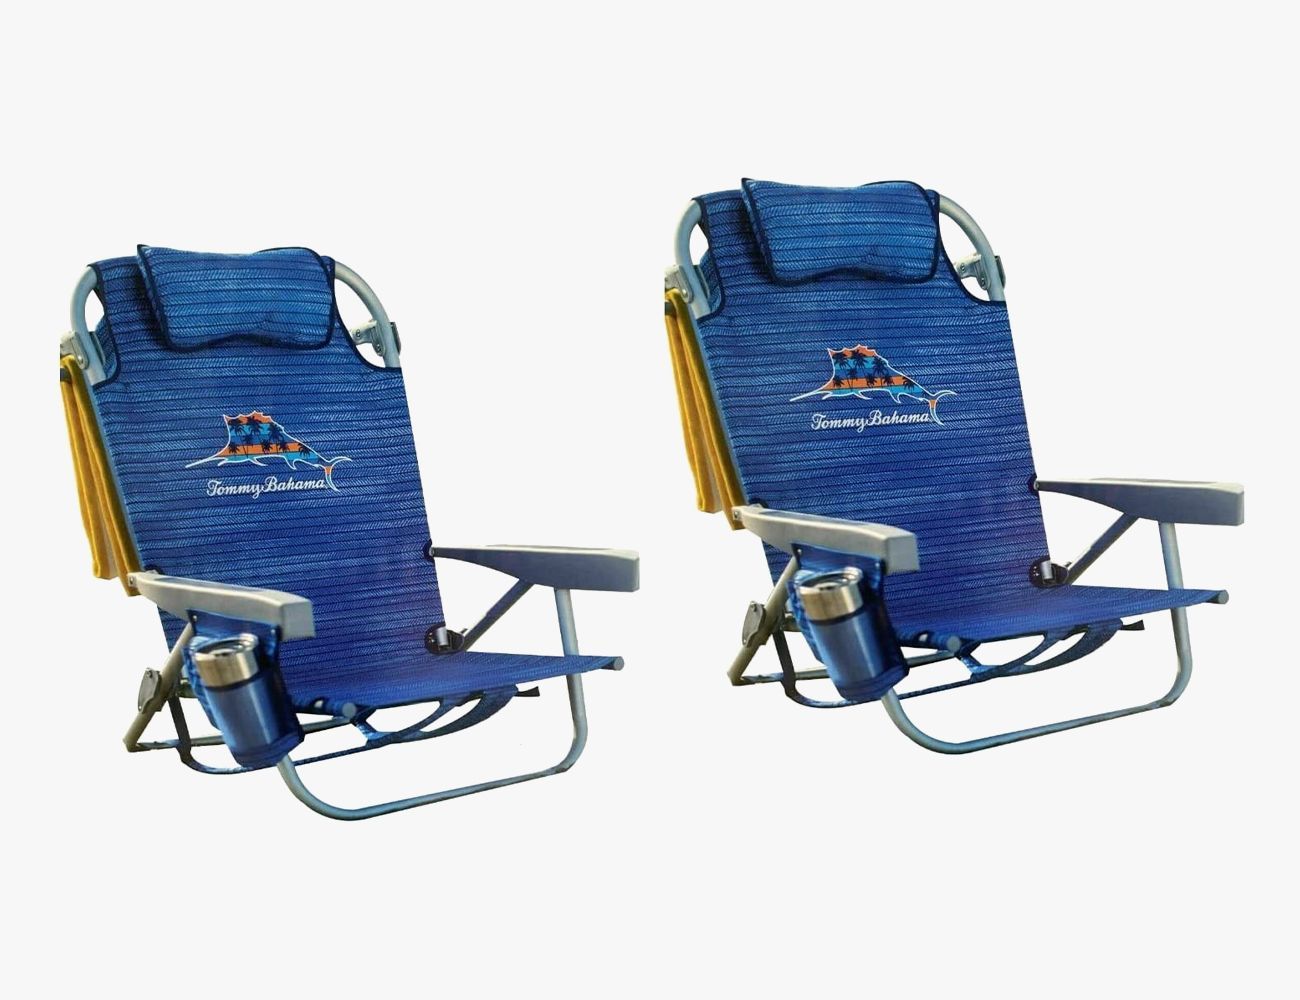 The 20 Best Beach Chairs for Summer: Tommy Bahama, Coleman & More